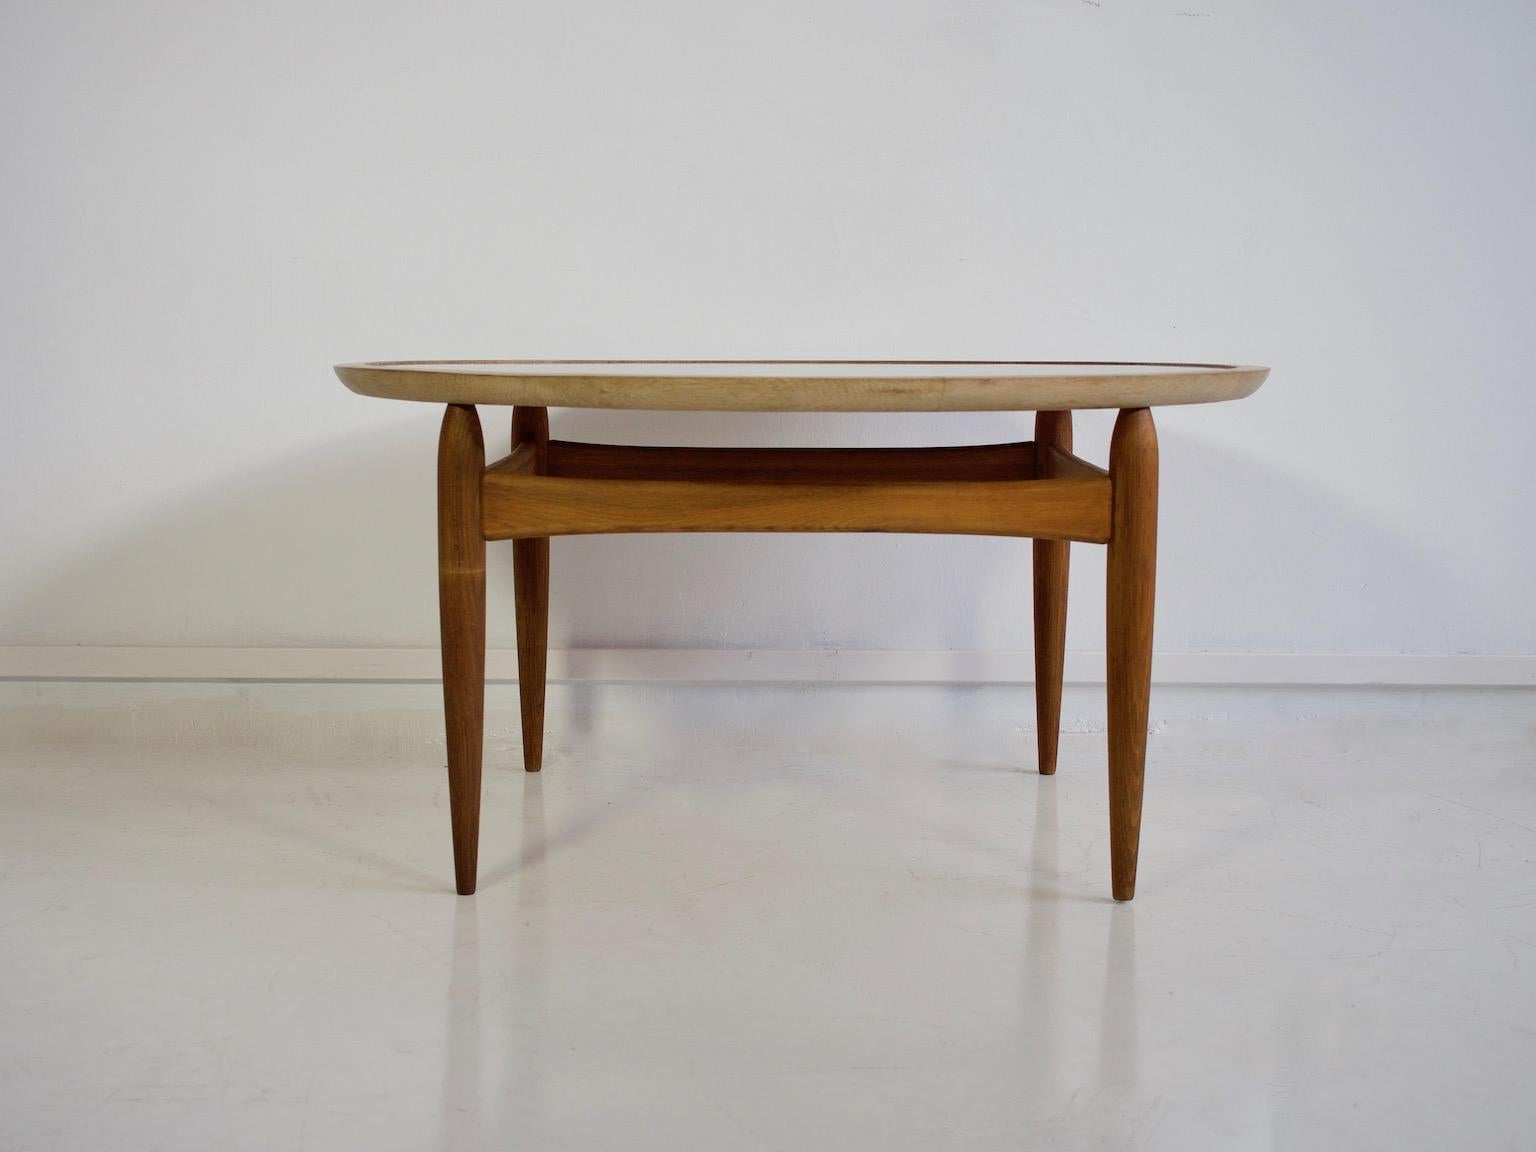 Round coffee table attributed to Ejvind A. Johansson, manufactured by Ludvig Pontoppidan, circa 1950s-1960s. Circular reversible tabletop with inlaid black Formica on one side and oak on the other side. Solid oiled oak frame with tapered legs.